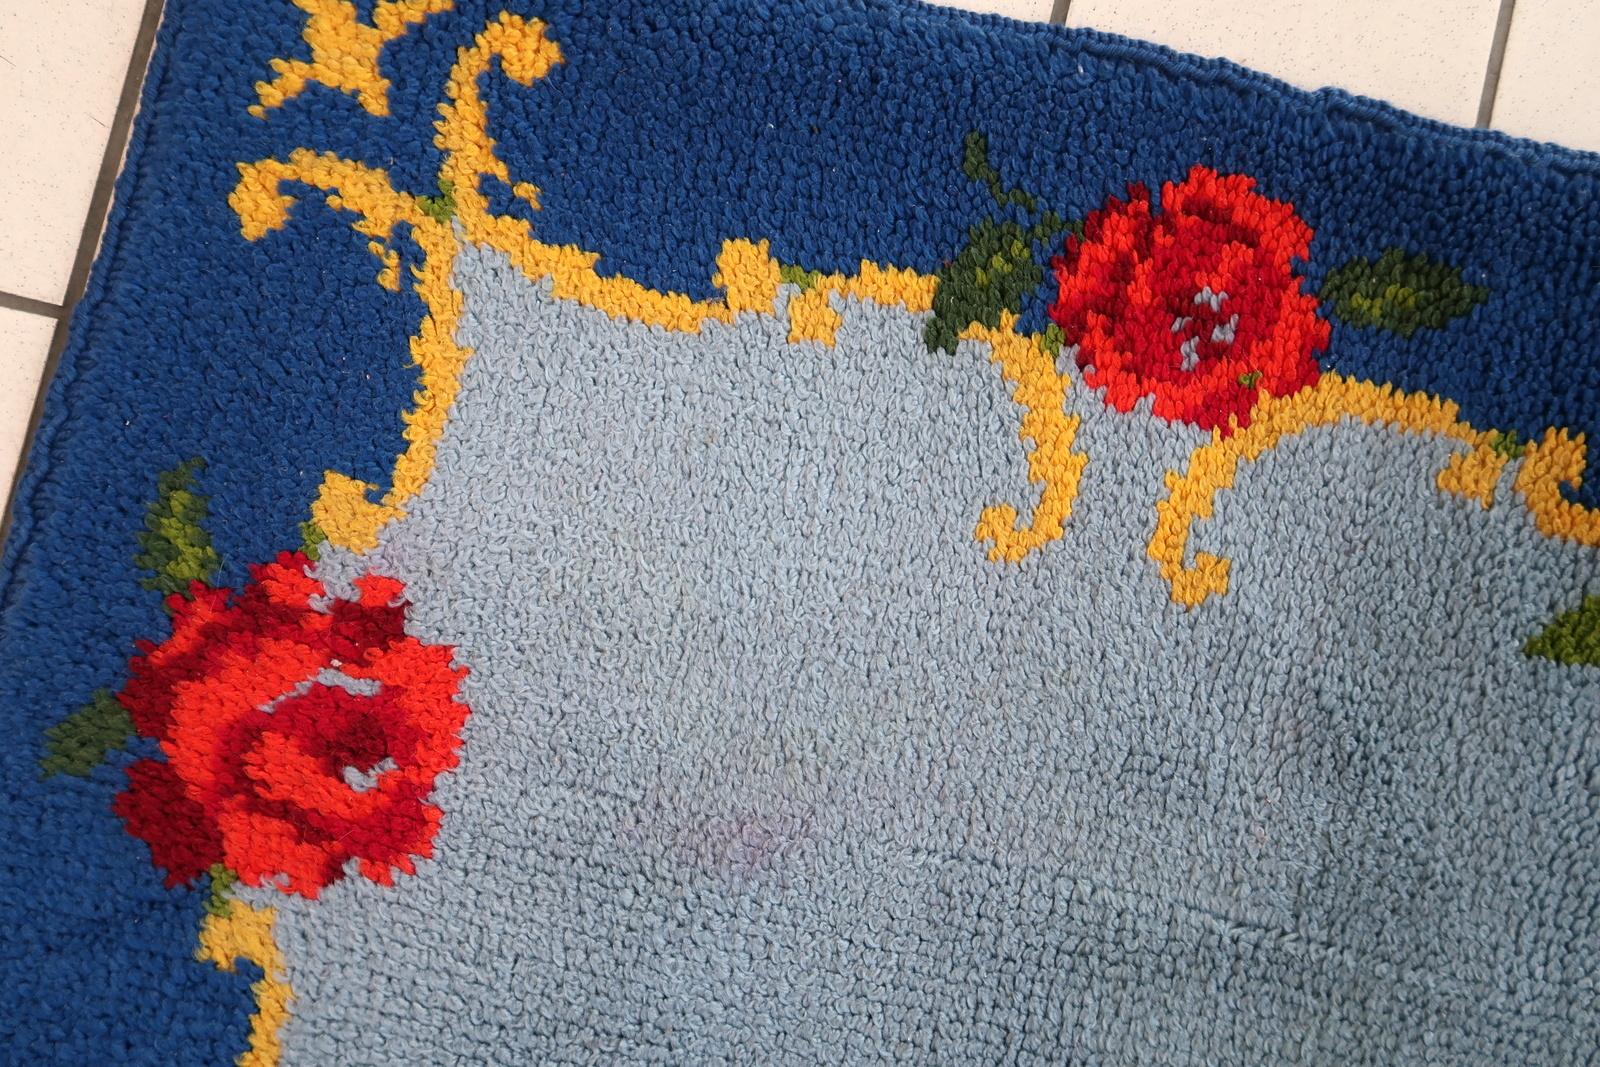 Vintage French Savonnerie rug in sky blue color. The rug has been made in wool in the end of 20th century. It is in original good condition.

-condition: original good,

-circa: 1960s,

-size: 2.5' x 5' (76cm x 155cm),

-material: